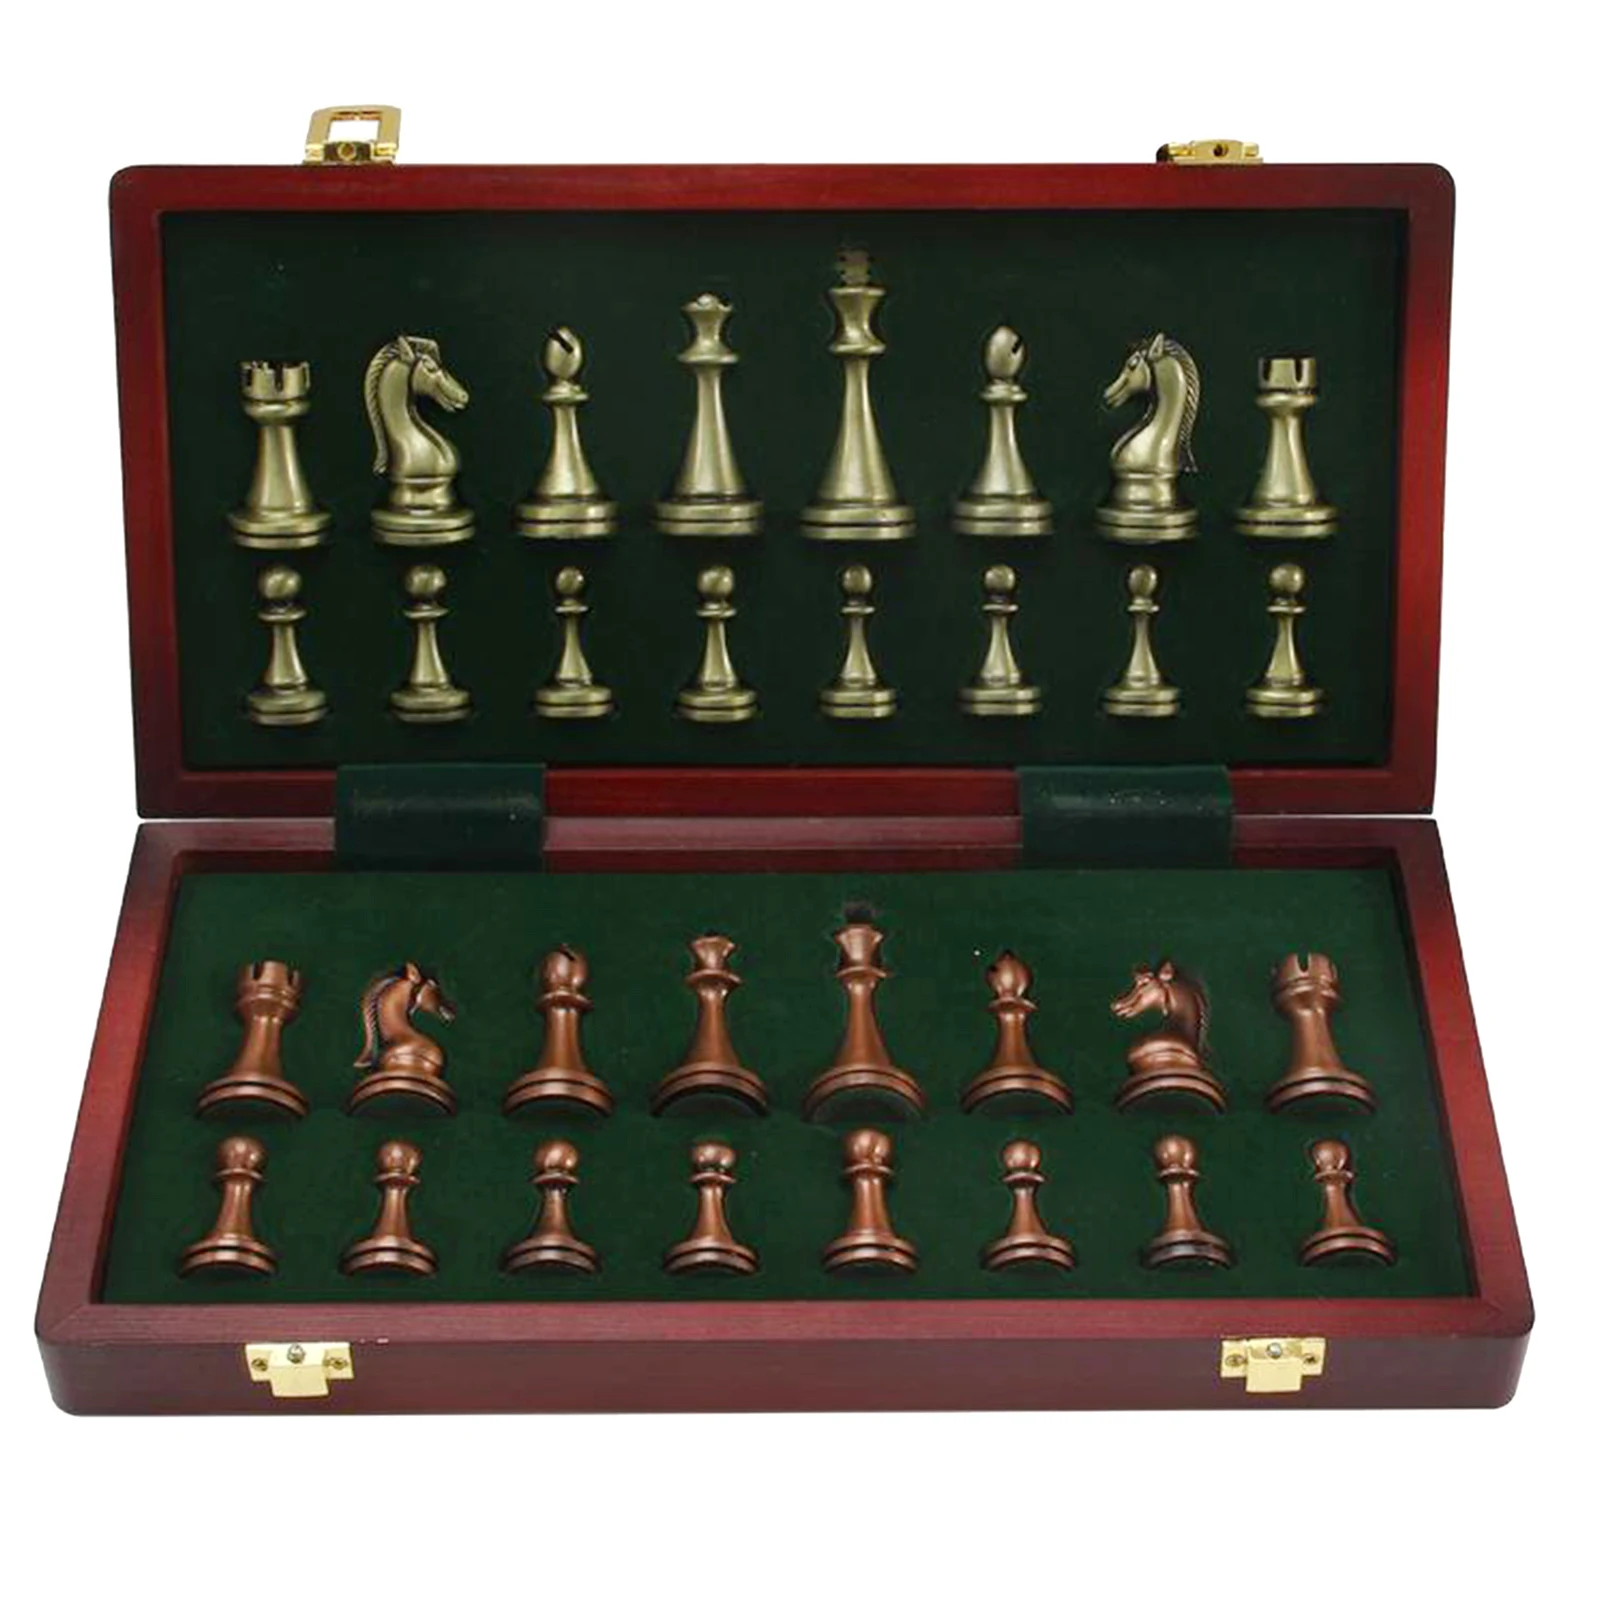 30x30cm Folding Metal Chess Set Tabletop Travel Board Game Family Game Toy